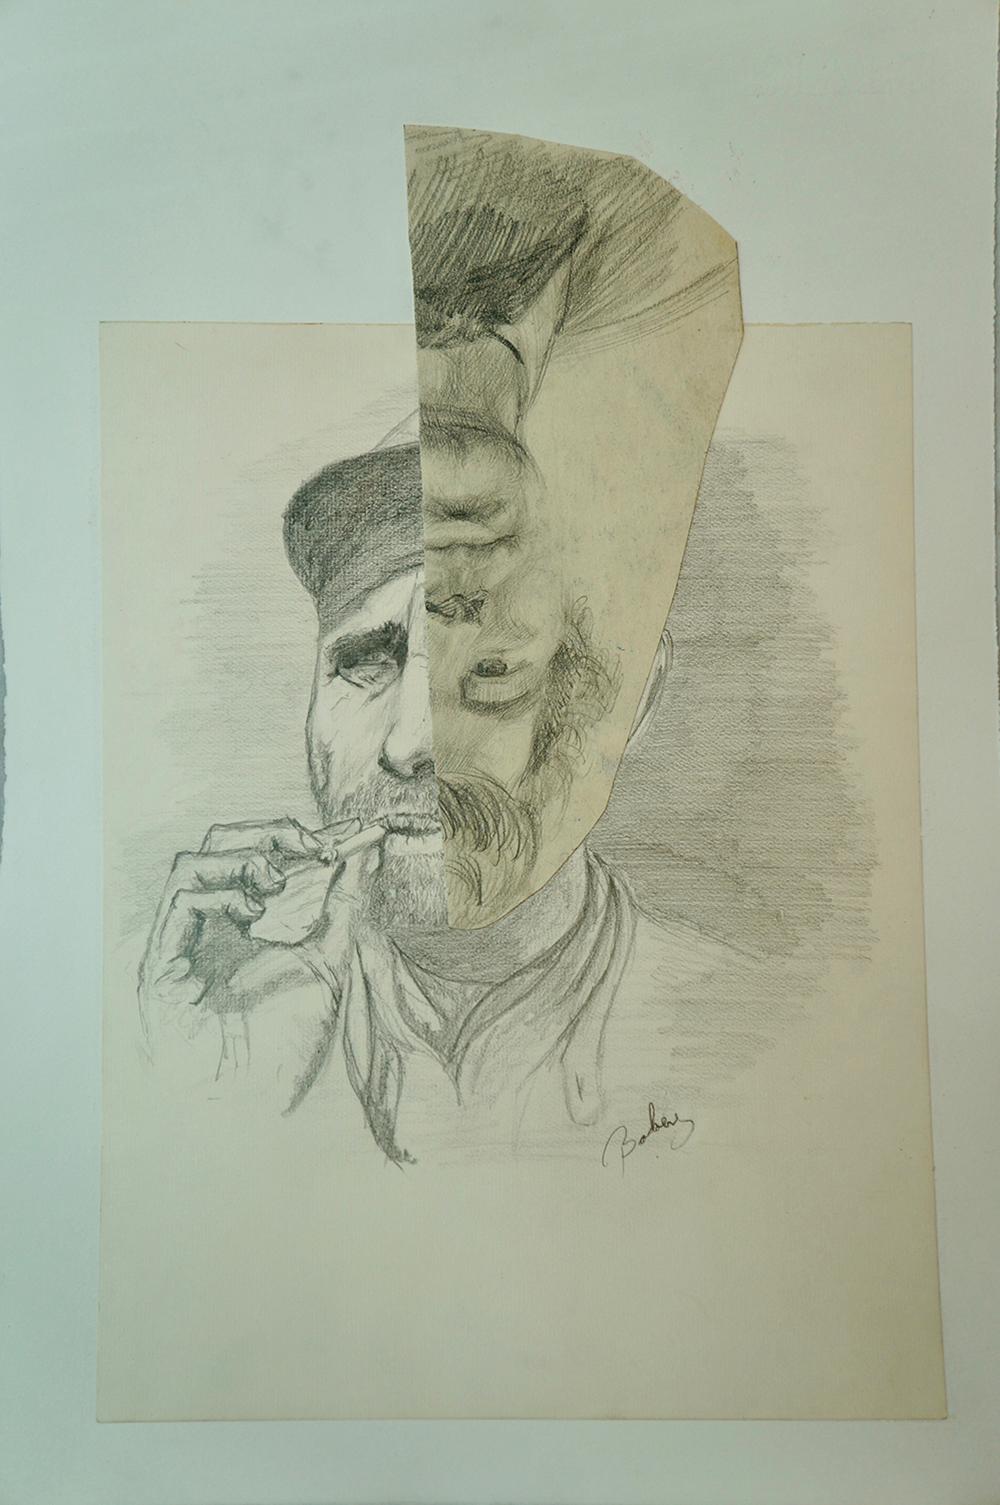 "Smoker", contemporary, pencil on paper, portrait, collage, drawing - Mixed Media Art by John Baker